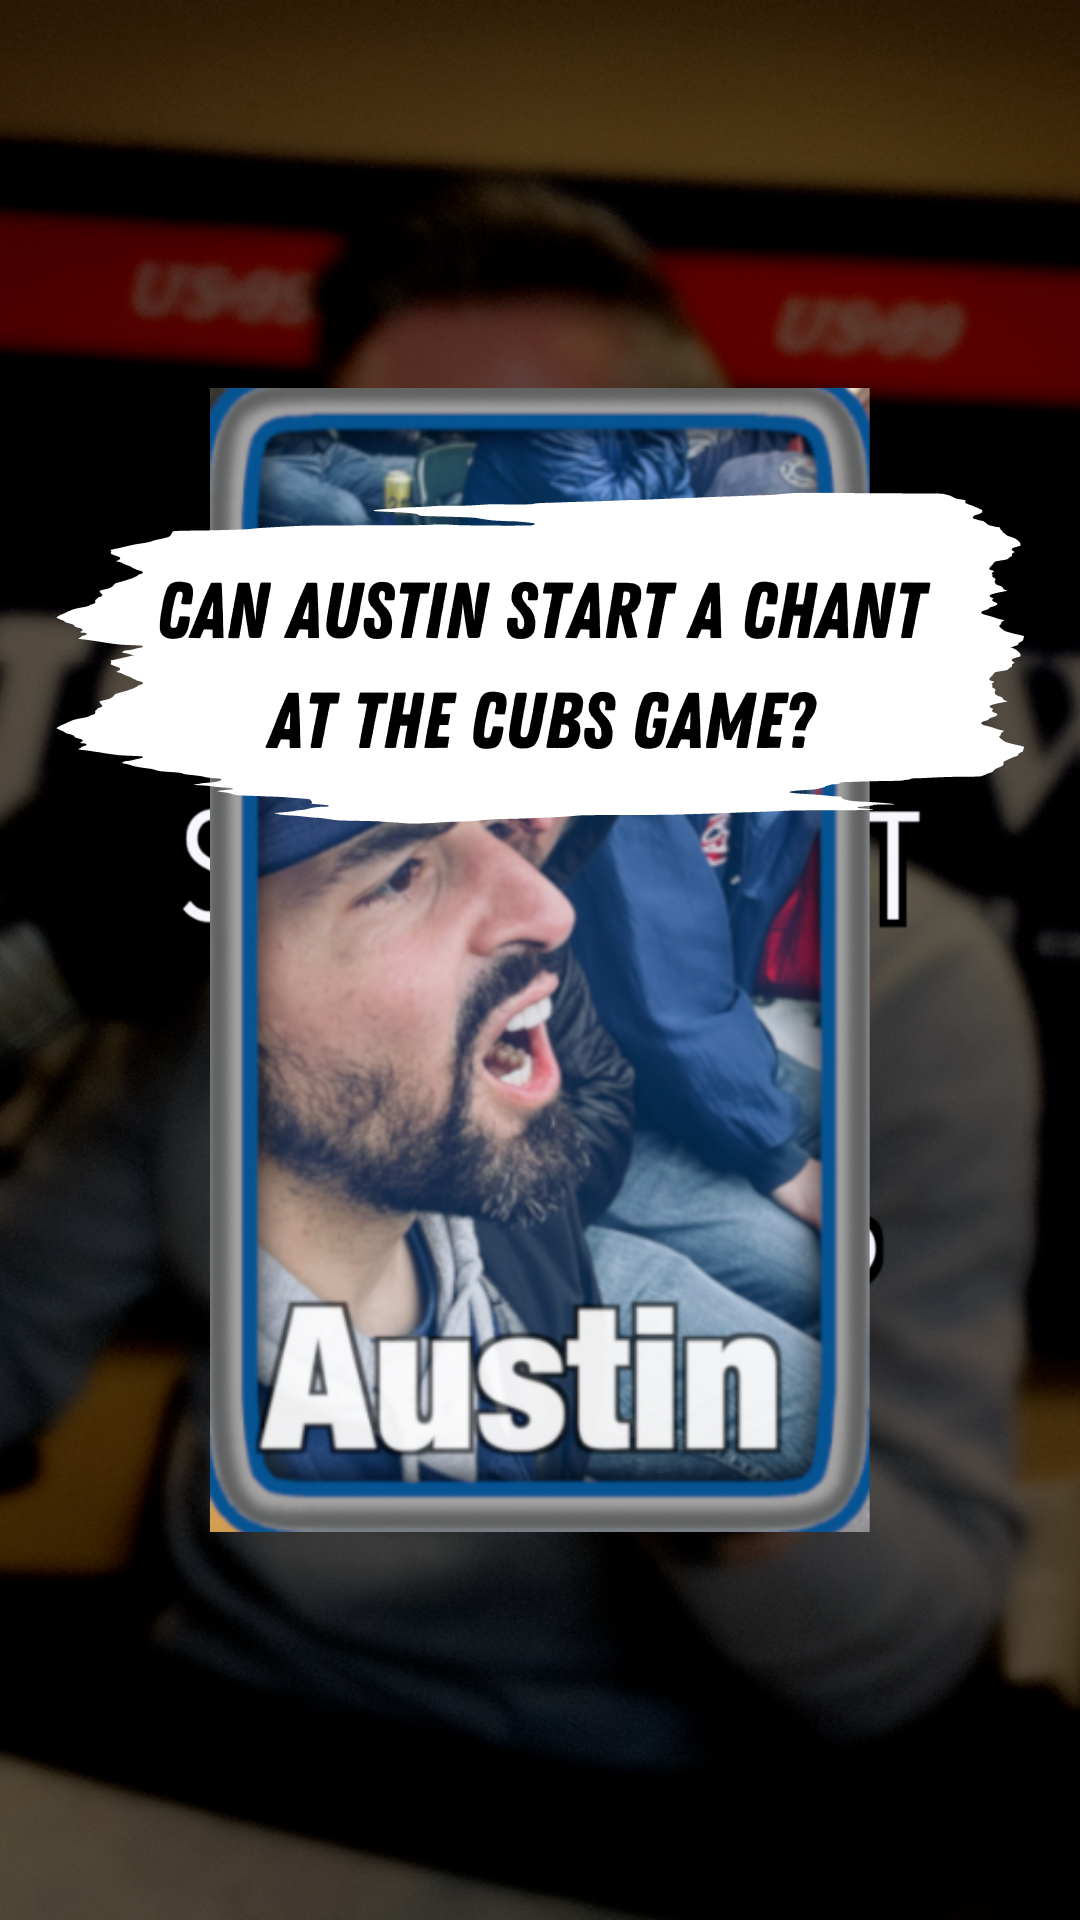 CAN AUSTIN START A CHANT AT THE CUBS GAME